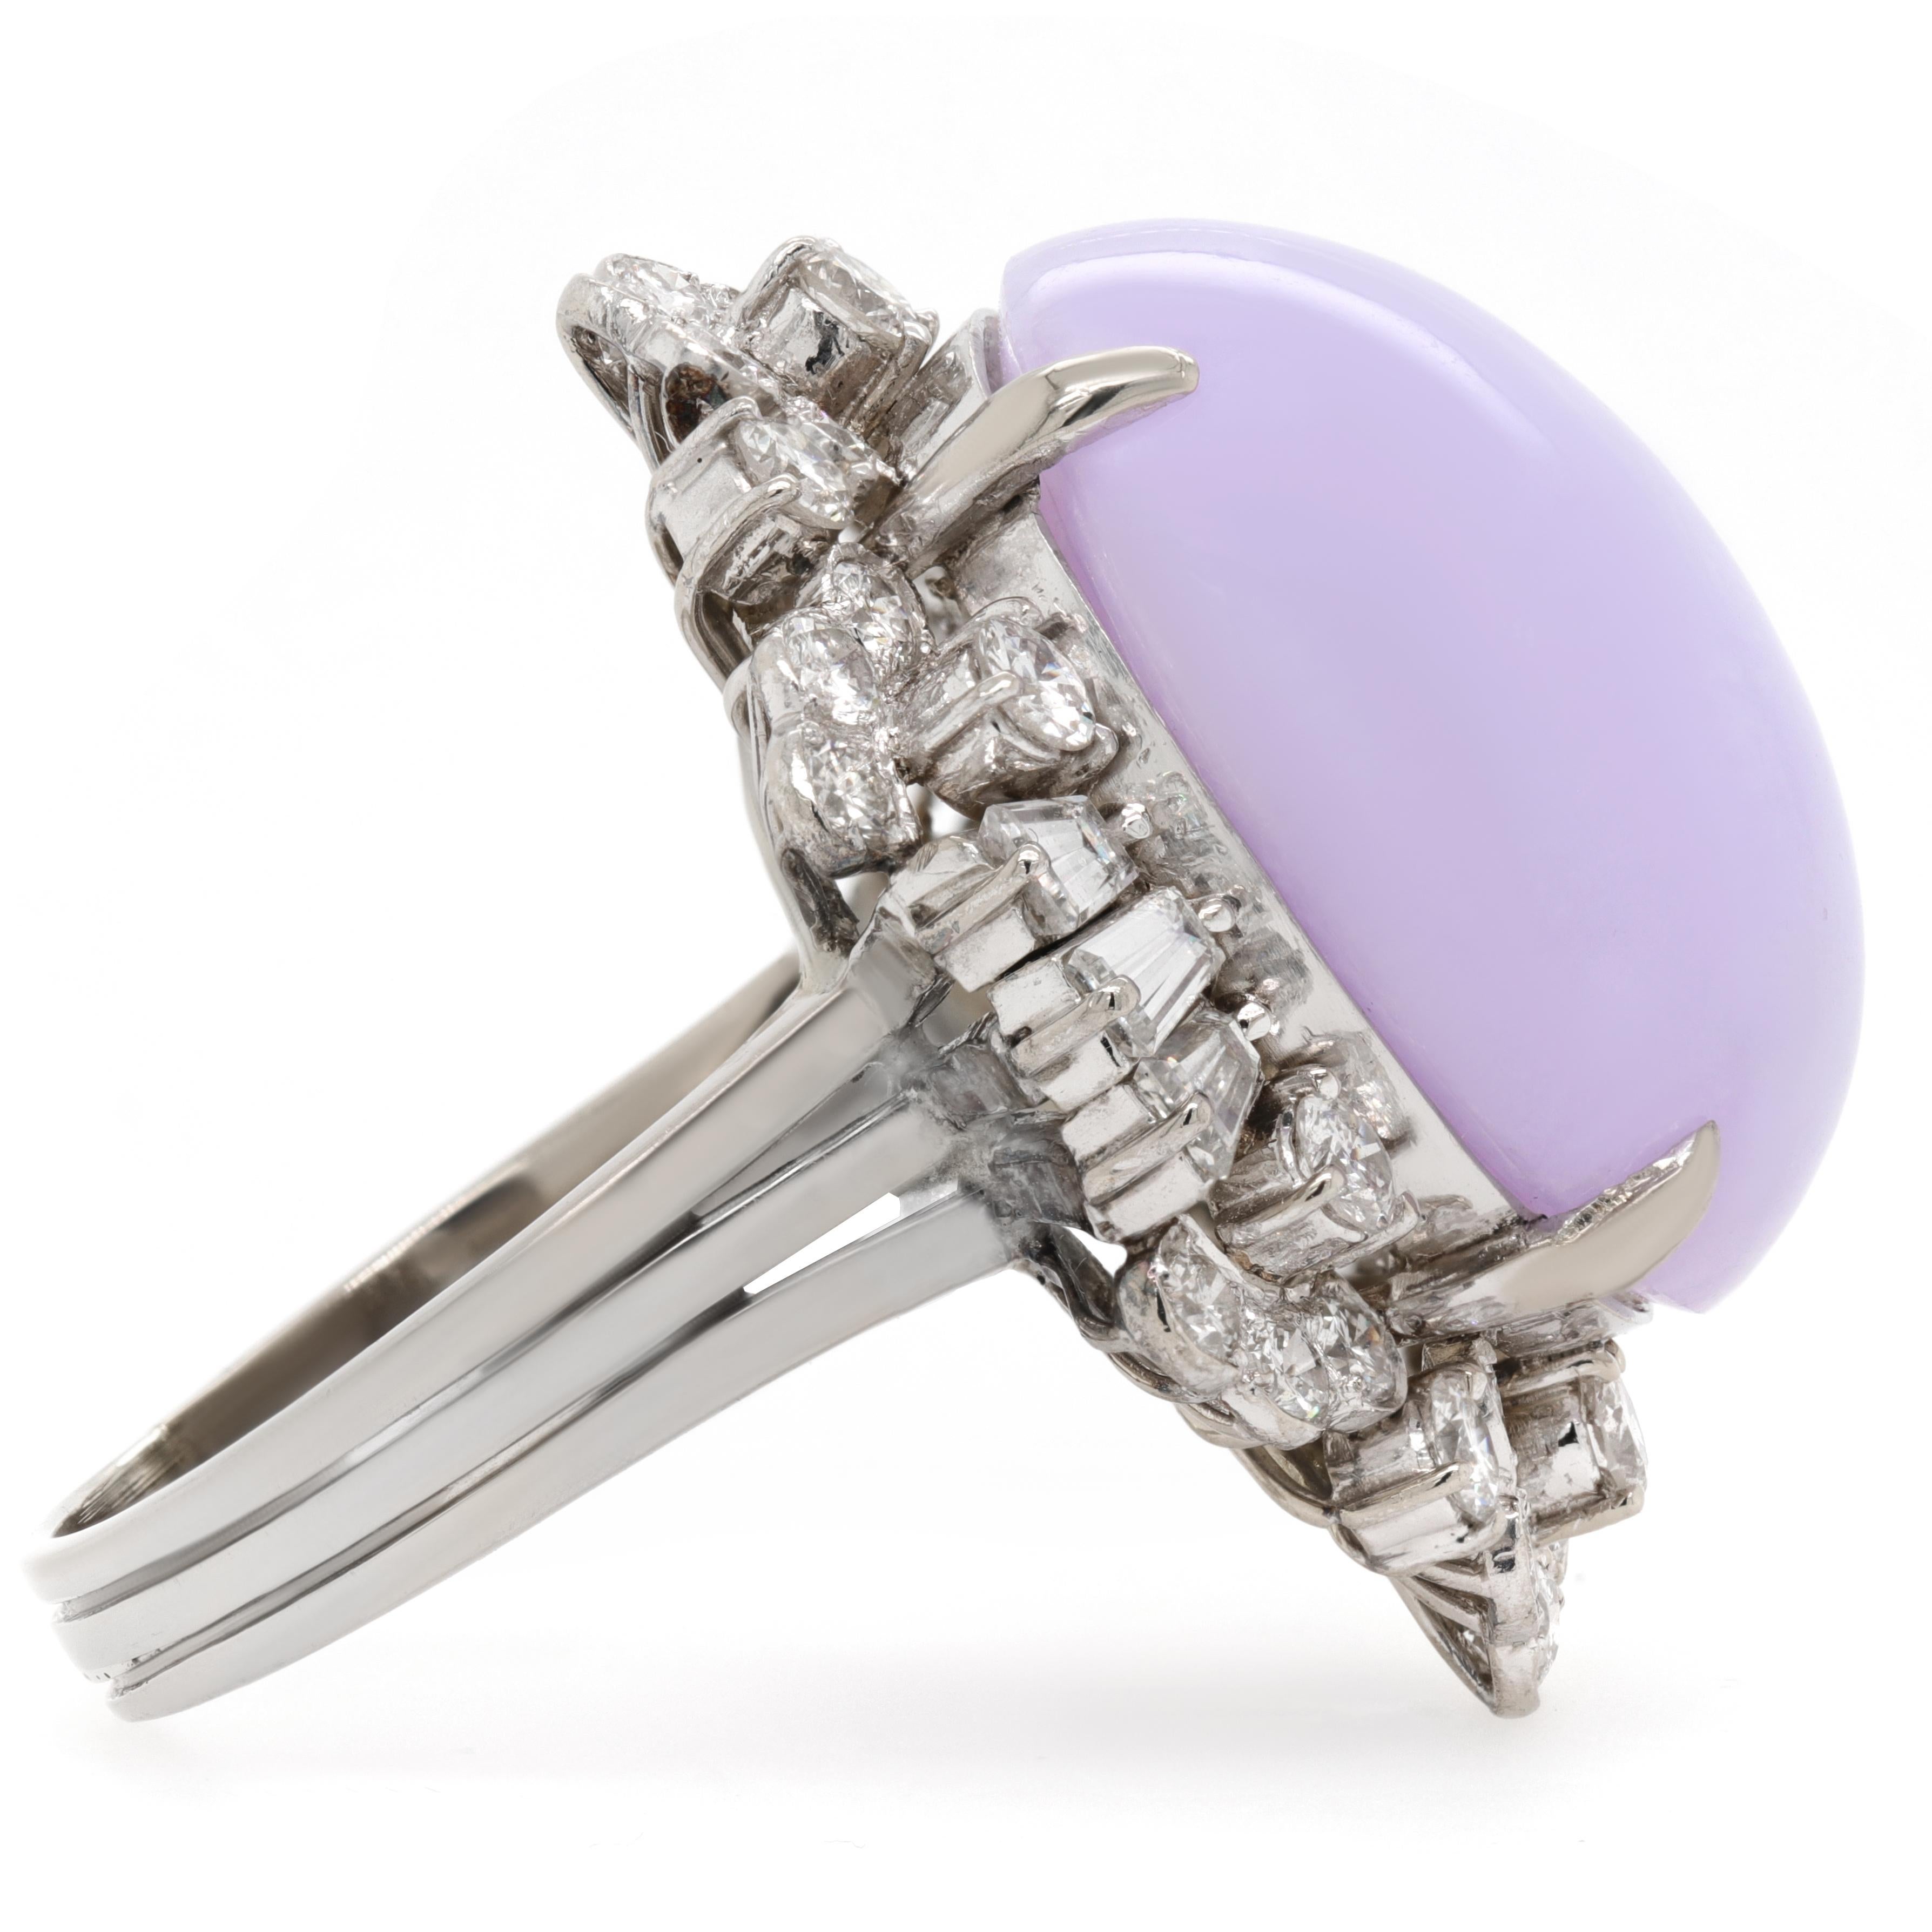 Jay Feder Lavender Jade and Diamond Ring in 14k White gold. The center stone is Cabochon shaped Lavender Jade.
It is surrounded with tapered baguette and round diamonds; estimated total weight is 3.00ct; F-G color and VS2-SI1 clarity overall.
The